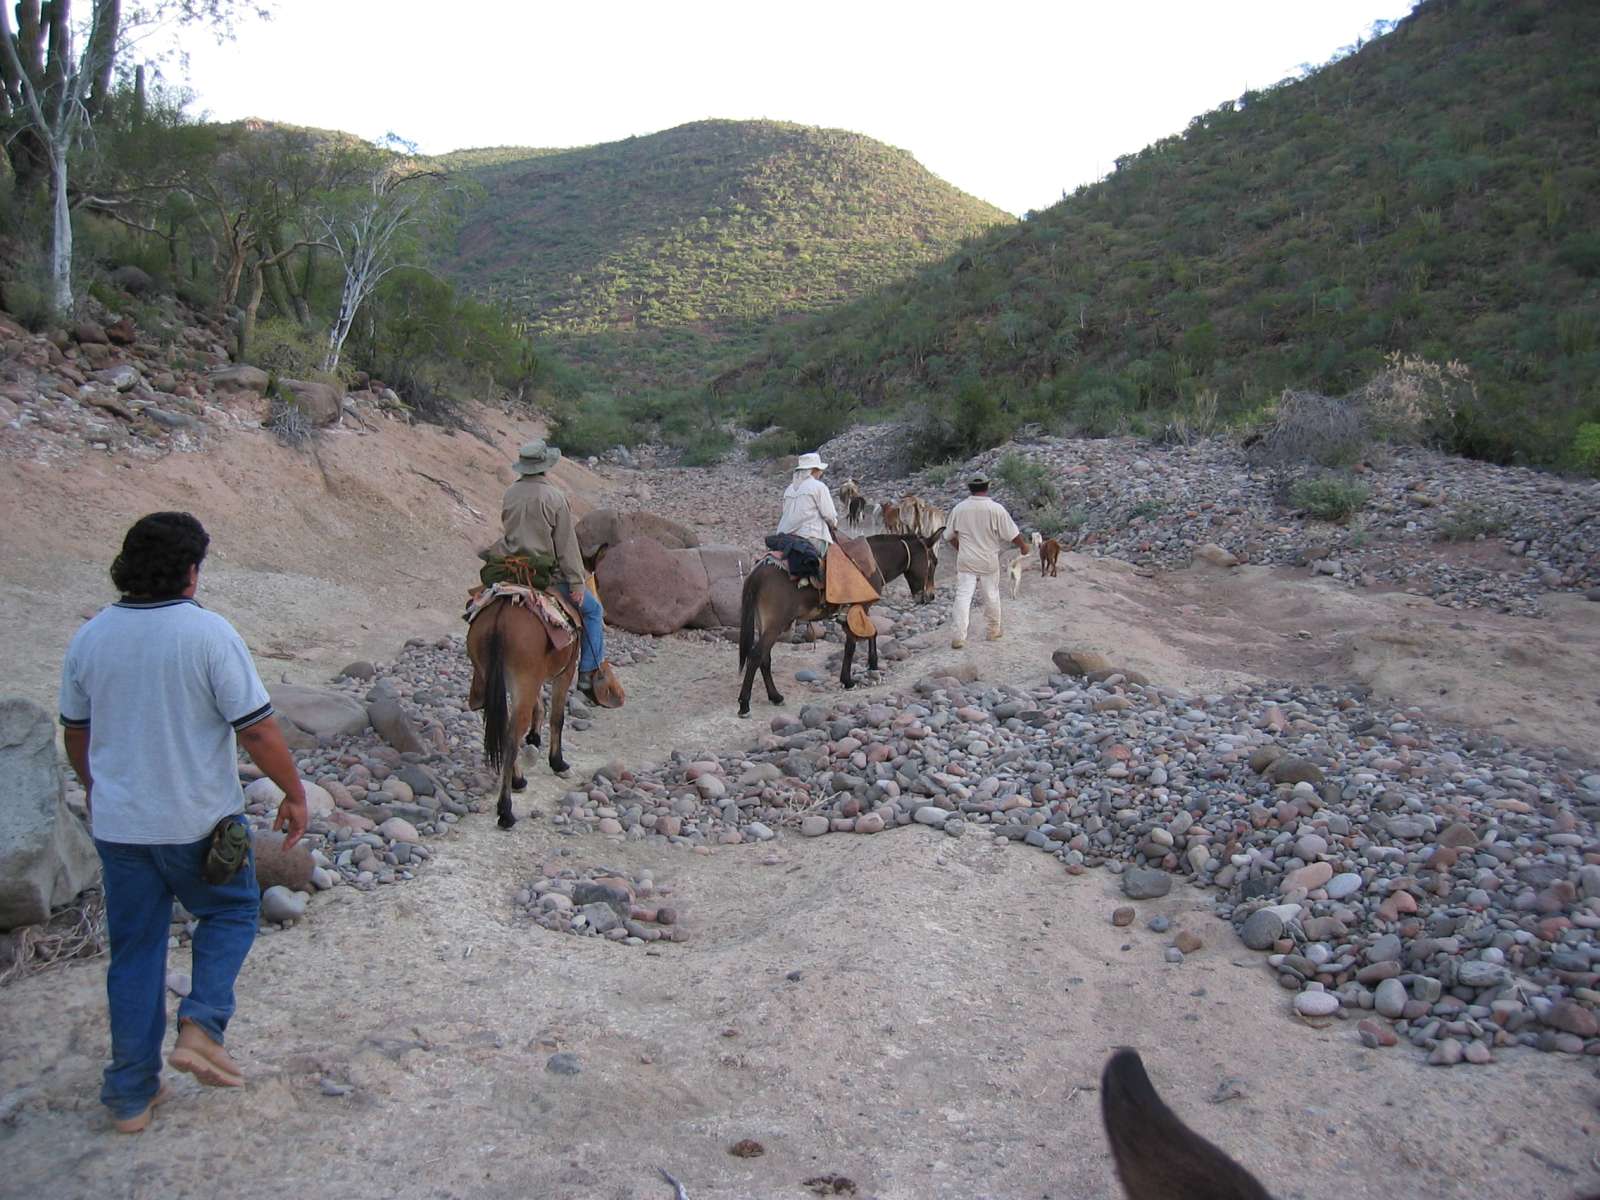 11/28/2007: We traveled by mule since the road had been wiped out by Hurricane John in 2006.